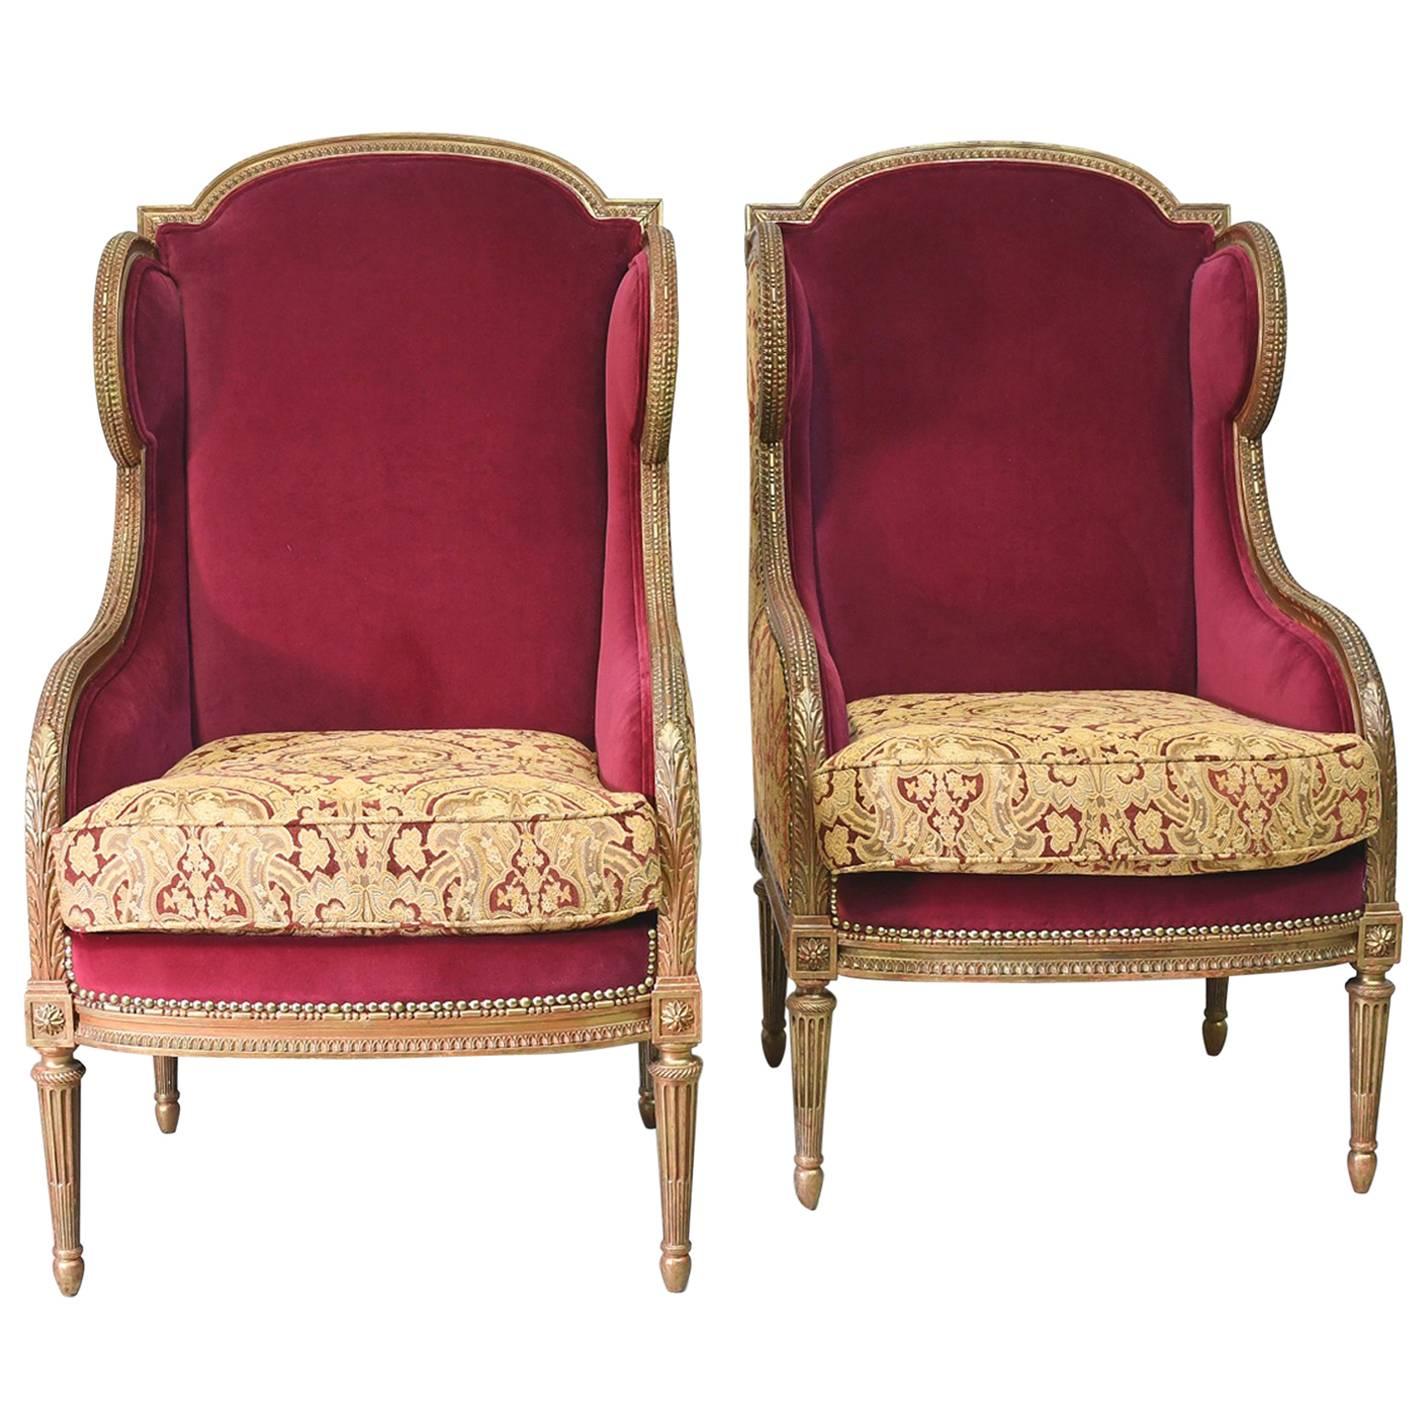 Pair of French 19th Century Louis XVI Style Bergeres or Wingback Chairs